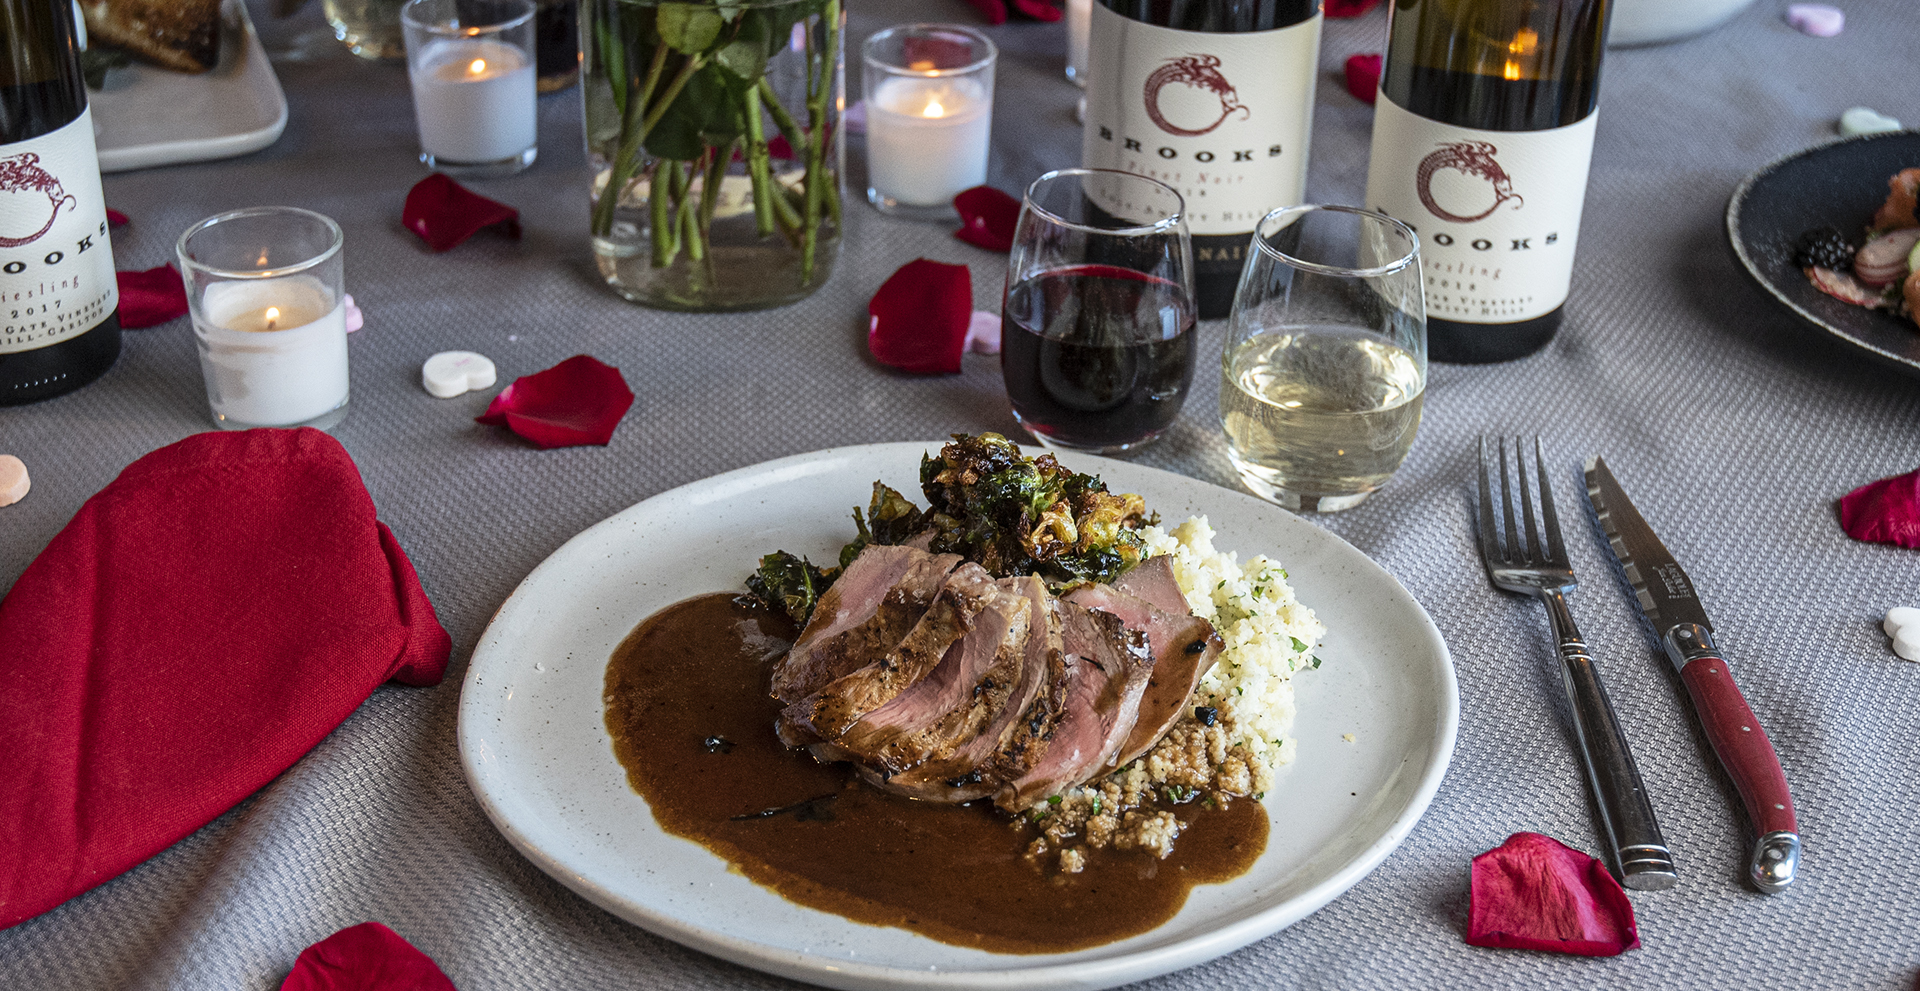 Roasted pork tenderloin with crispy brussels sprouts & herbed couscous